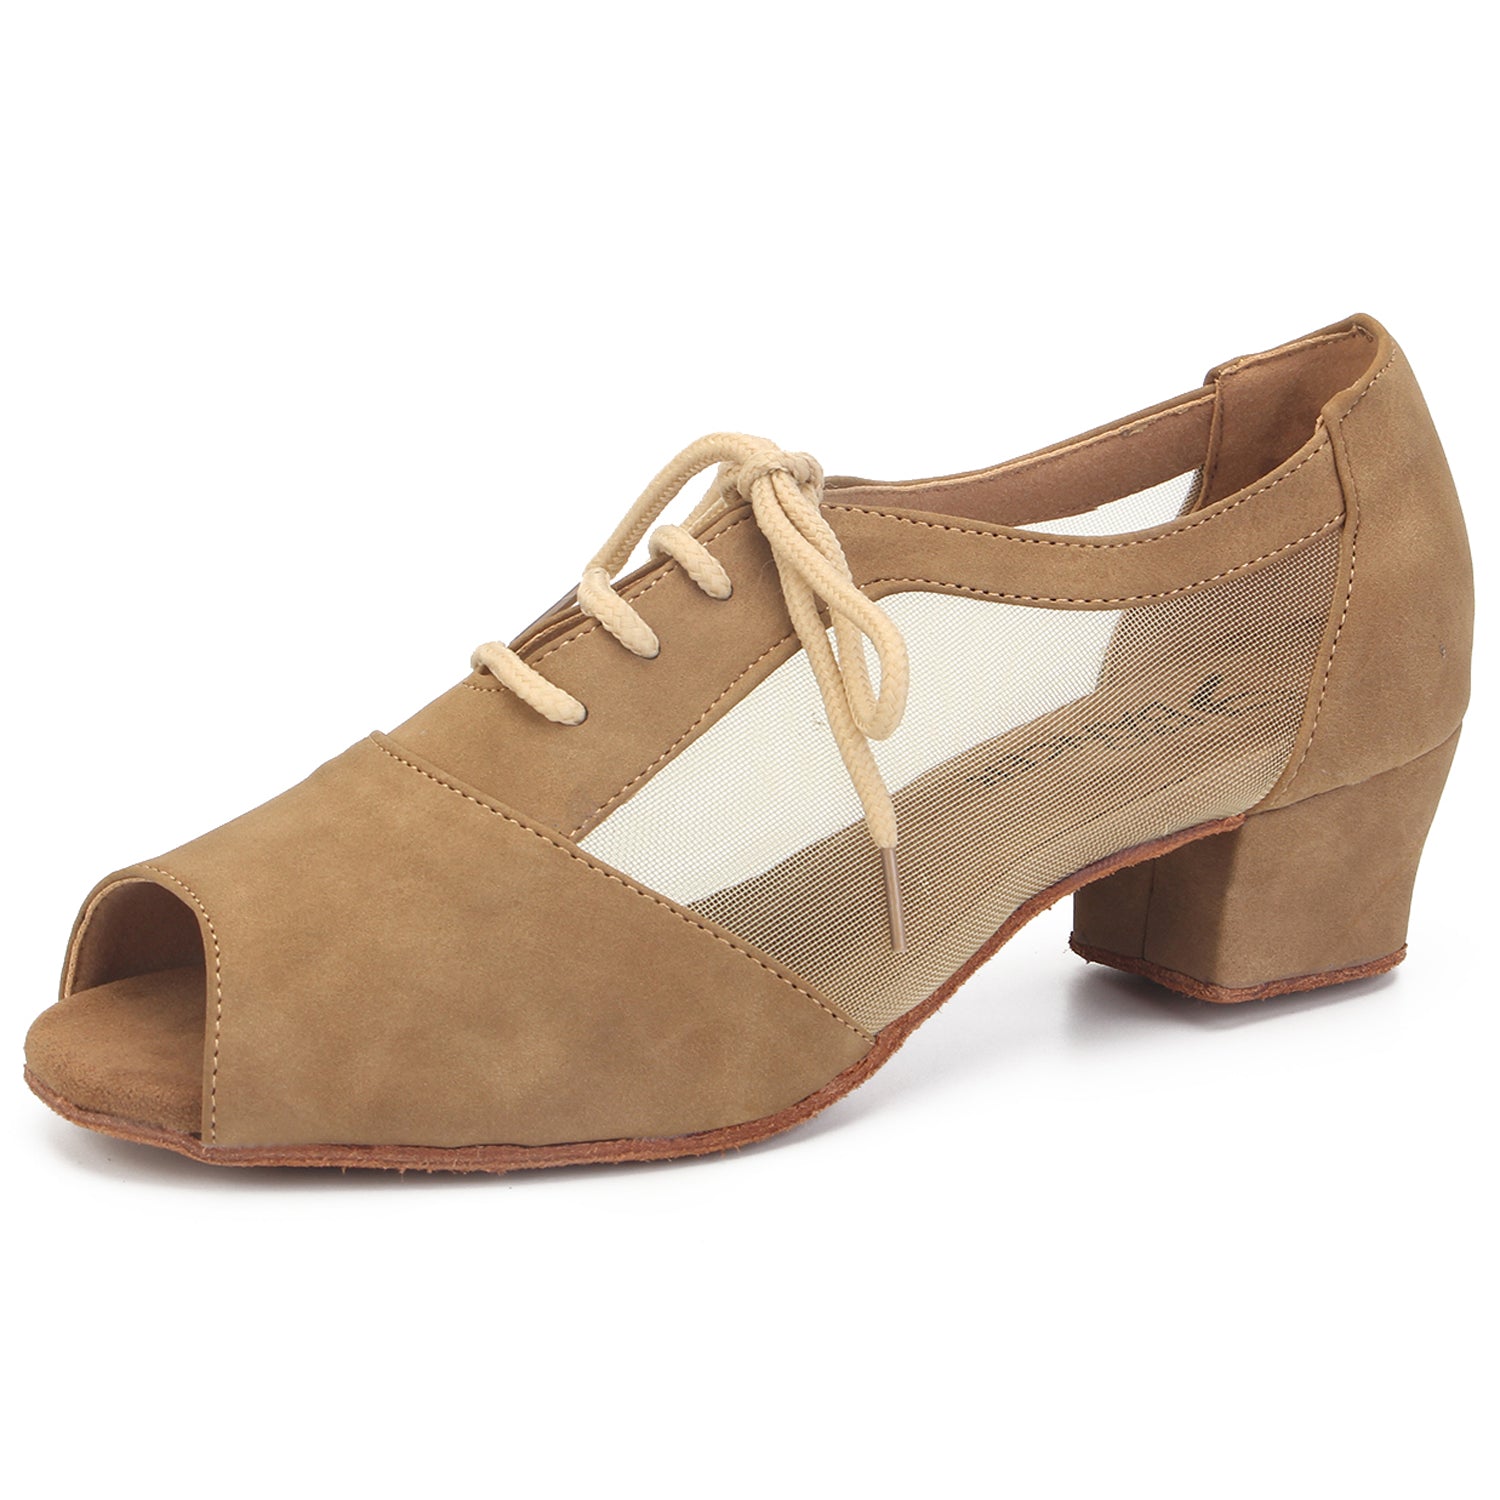 Women Ballroom Dancing Shoes with Suede Sole Lace-up Peep-toe in Brown for Tango Latin Practice (PD1141C)2